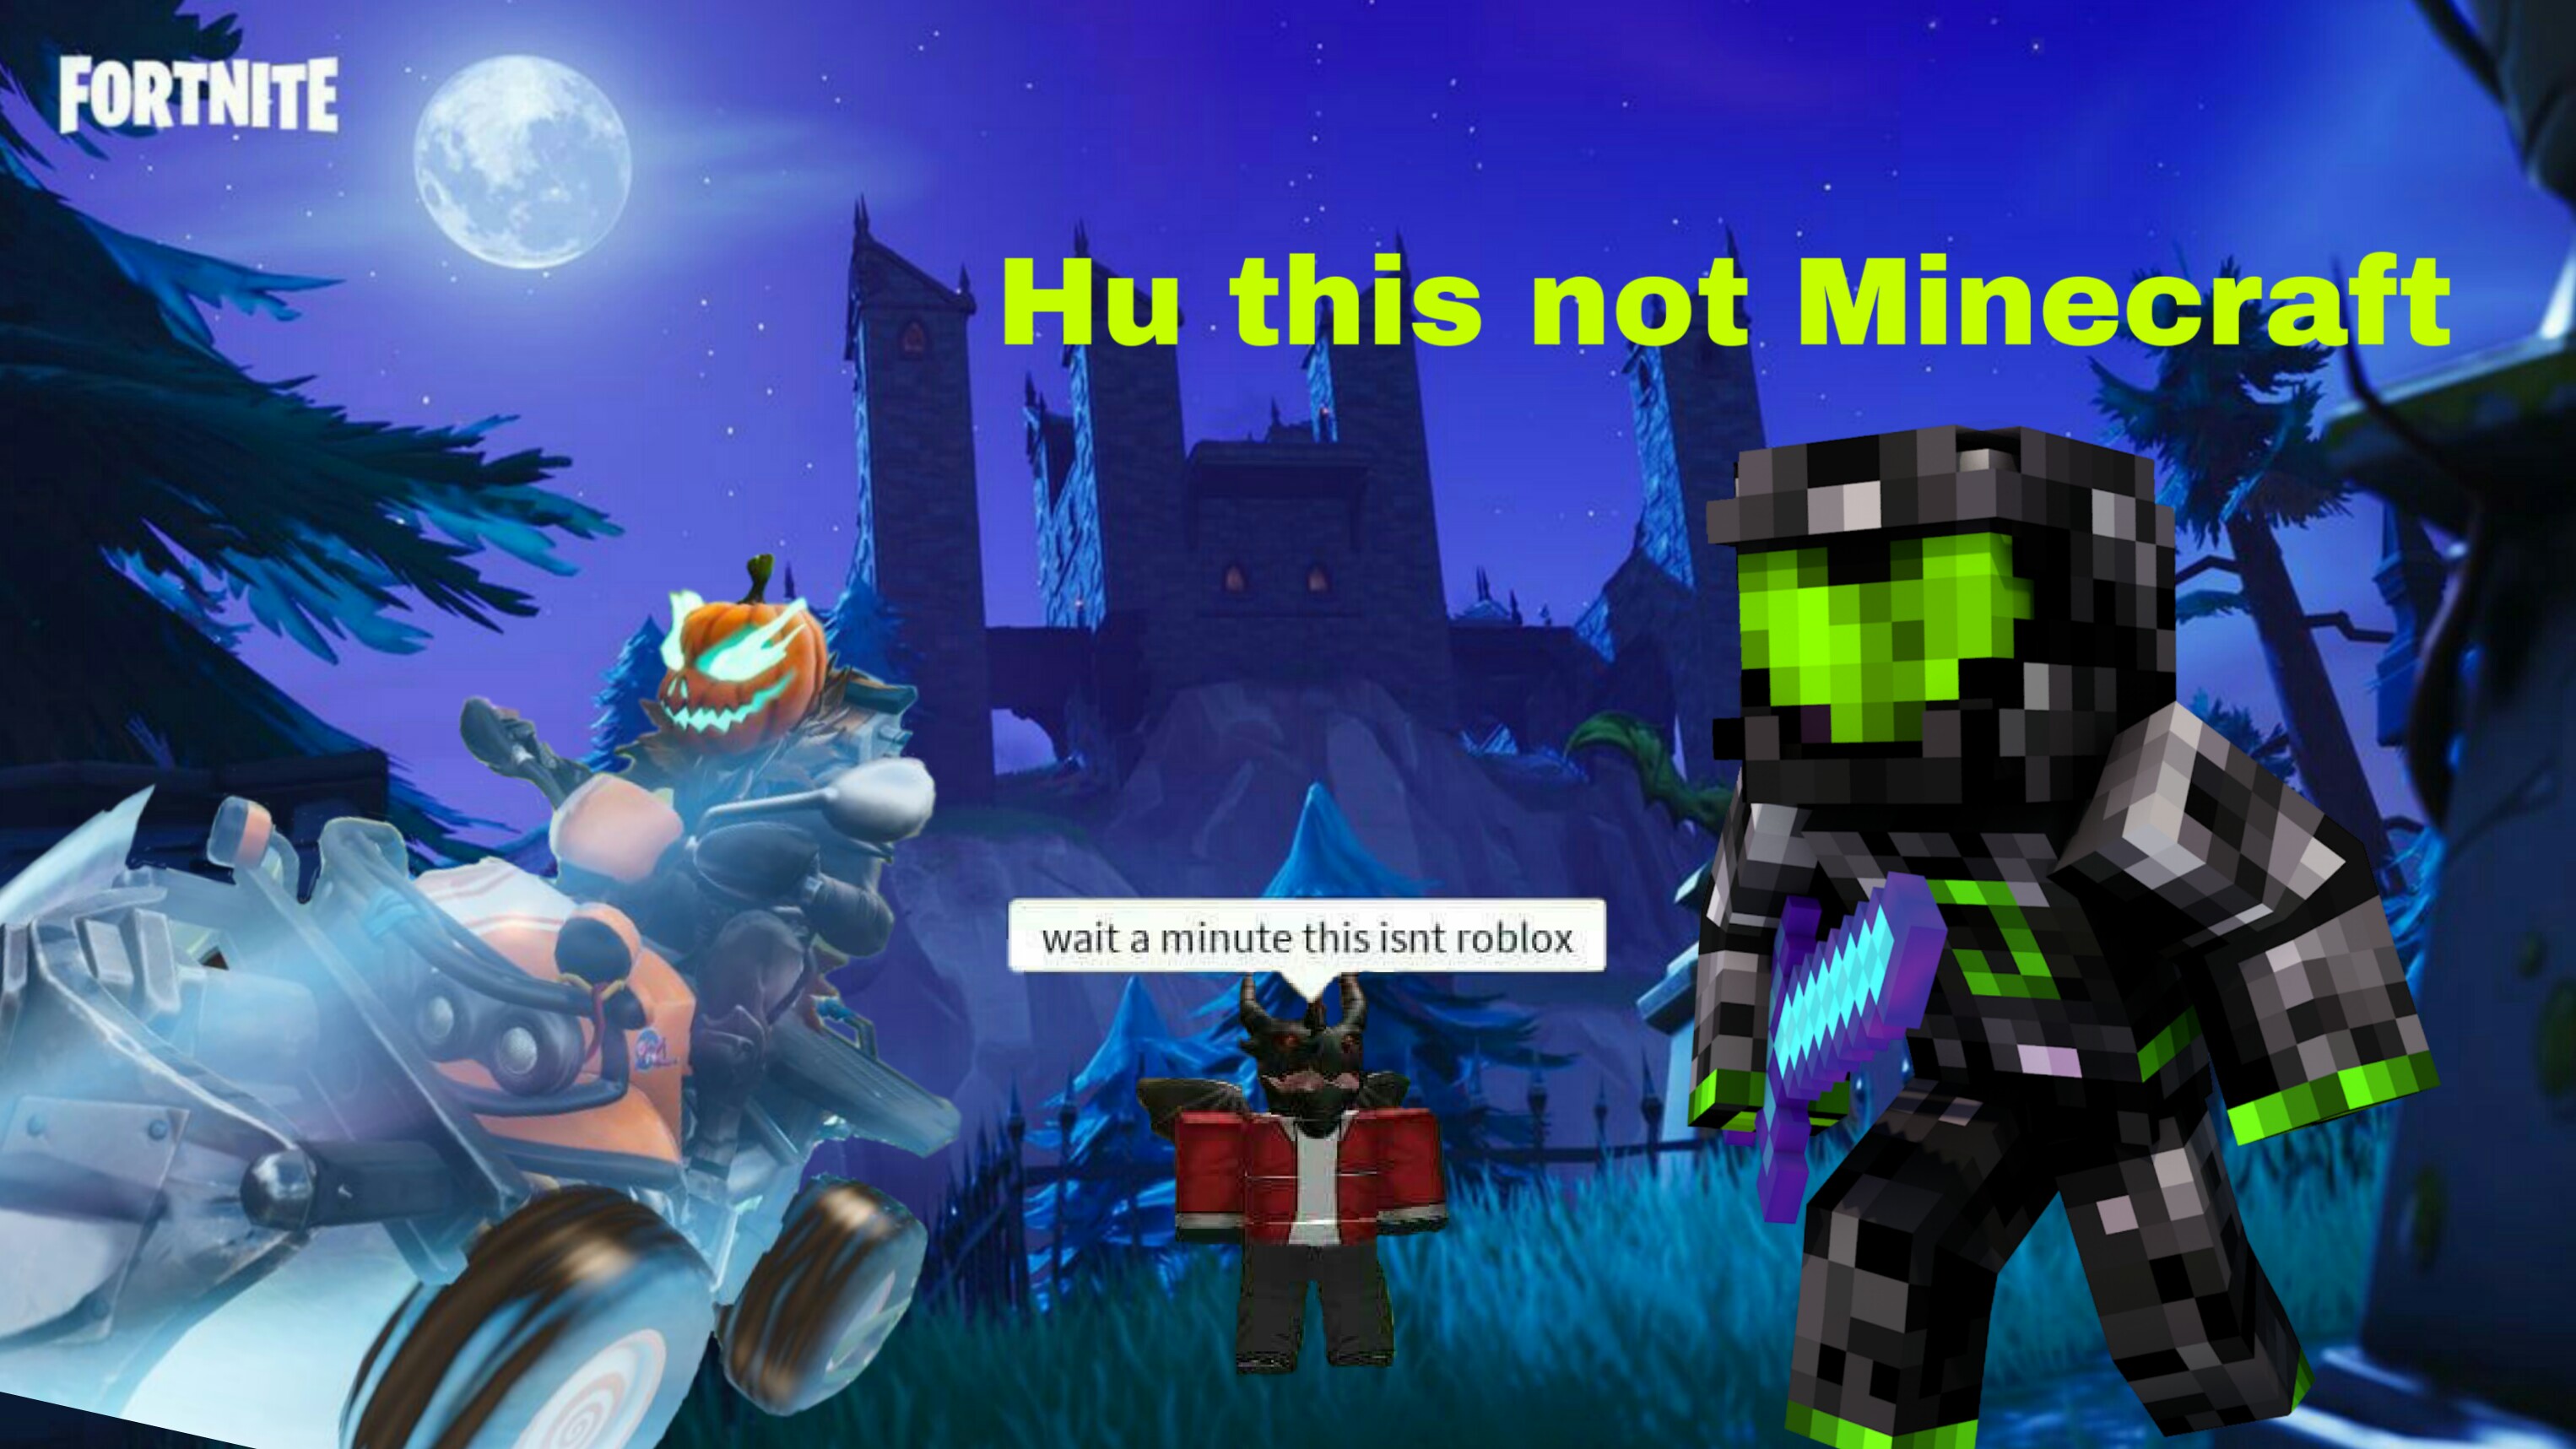 Fortnite X Minecraft X Roblox Image By Fnafstudios - minecraft fortnite mixed roblox